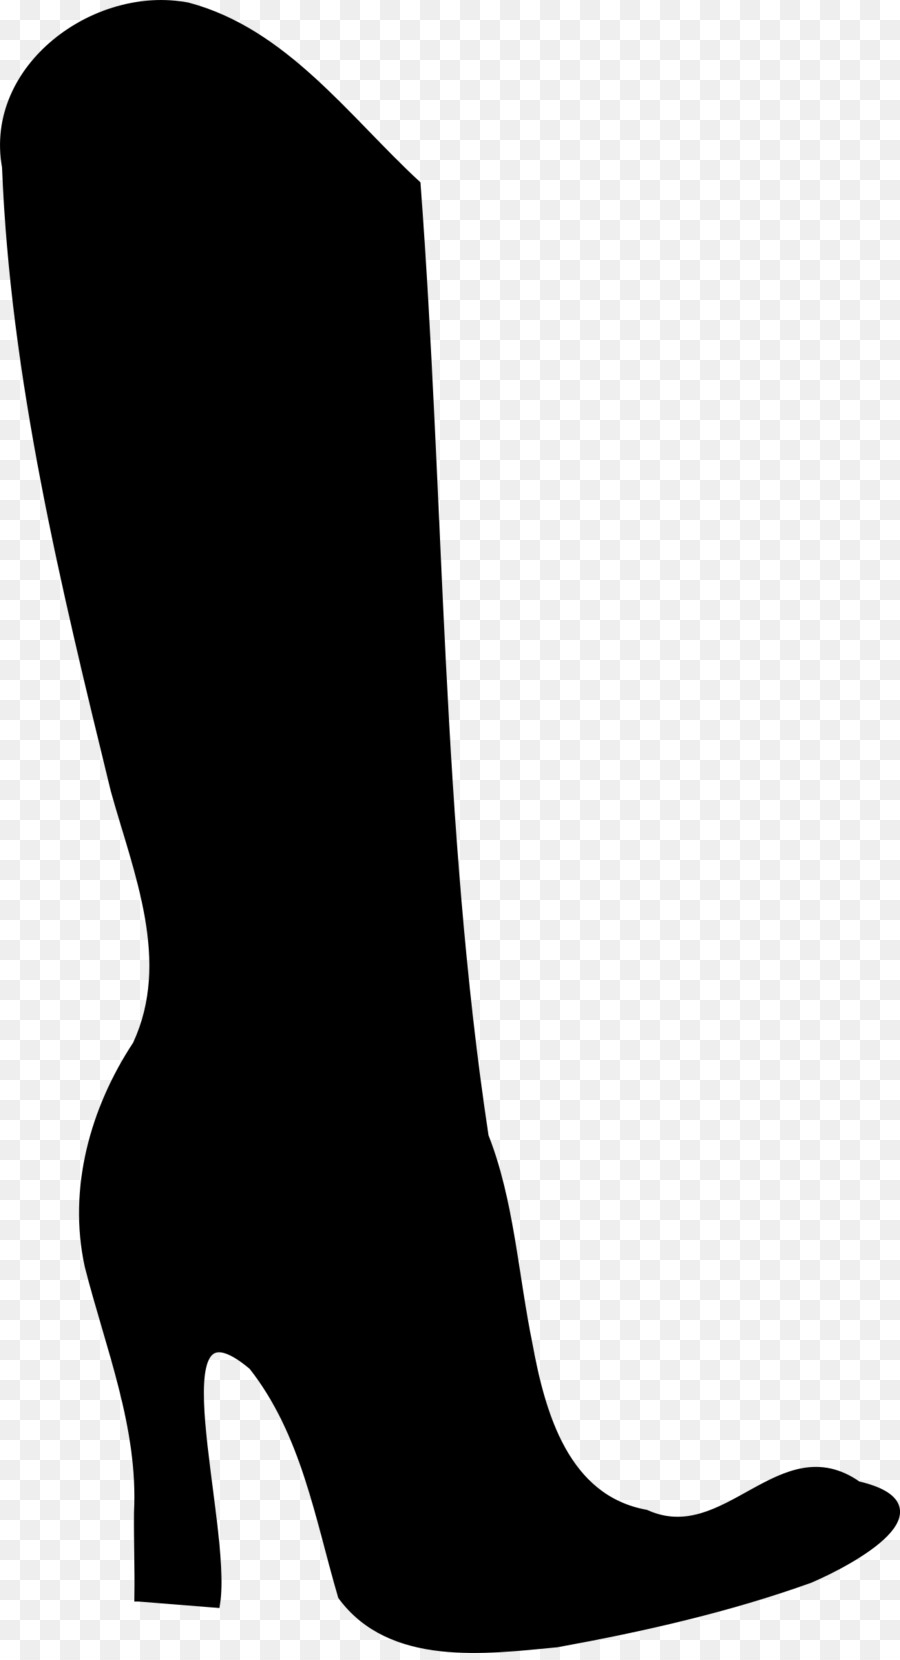 Boot Shoe Silhouette Clip art - heels png download - 1307*2400 - Free Transparent  png Download.